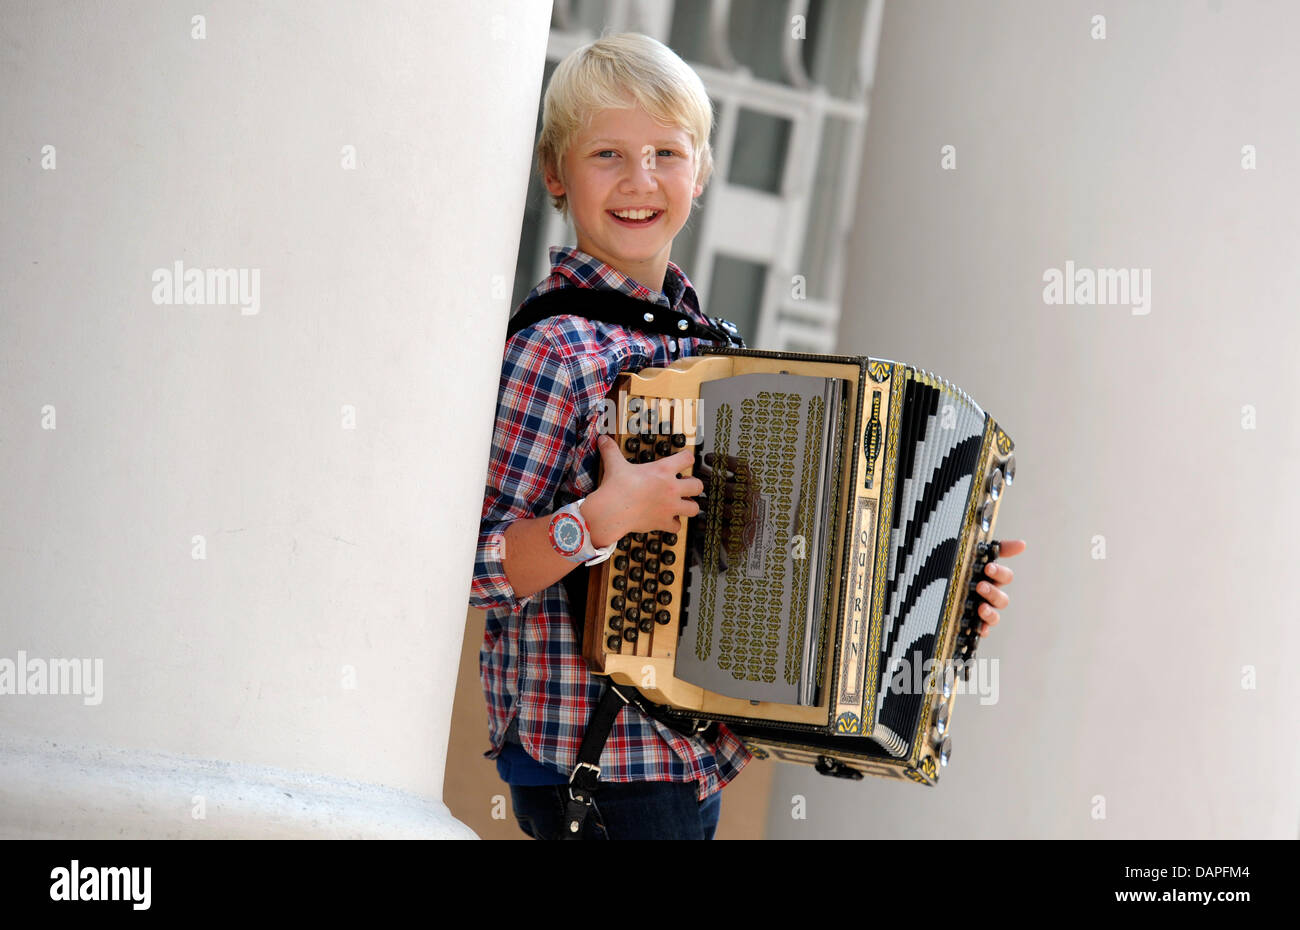 Twelve-year-old musician Quirin Weber poses in Munich, Germany, 17 August 2011. Weber could be the new star in German folk music. On 19 August 2011, Weber's first Album 'Musik, fertig, los!' ('Music, ready, go!') will be in stores. Photo: Tobias Hase Stock Photo